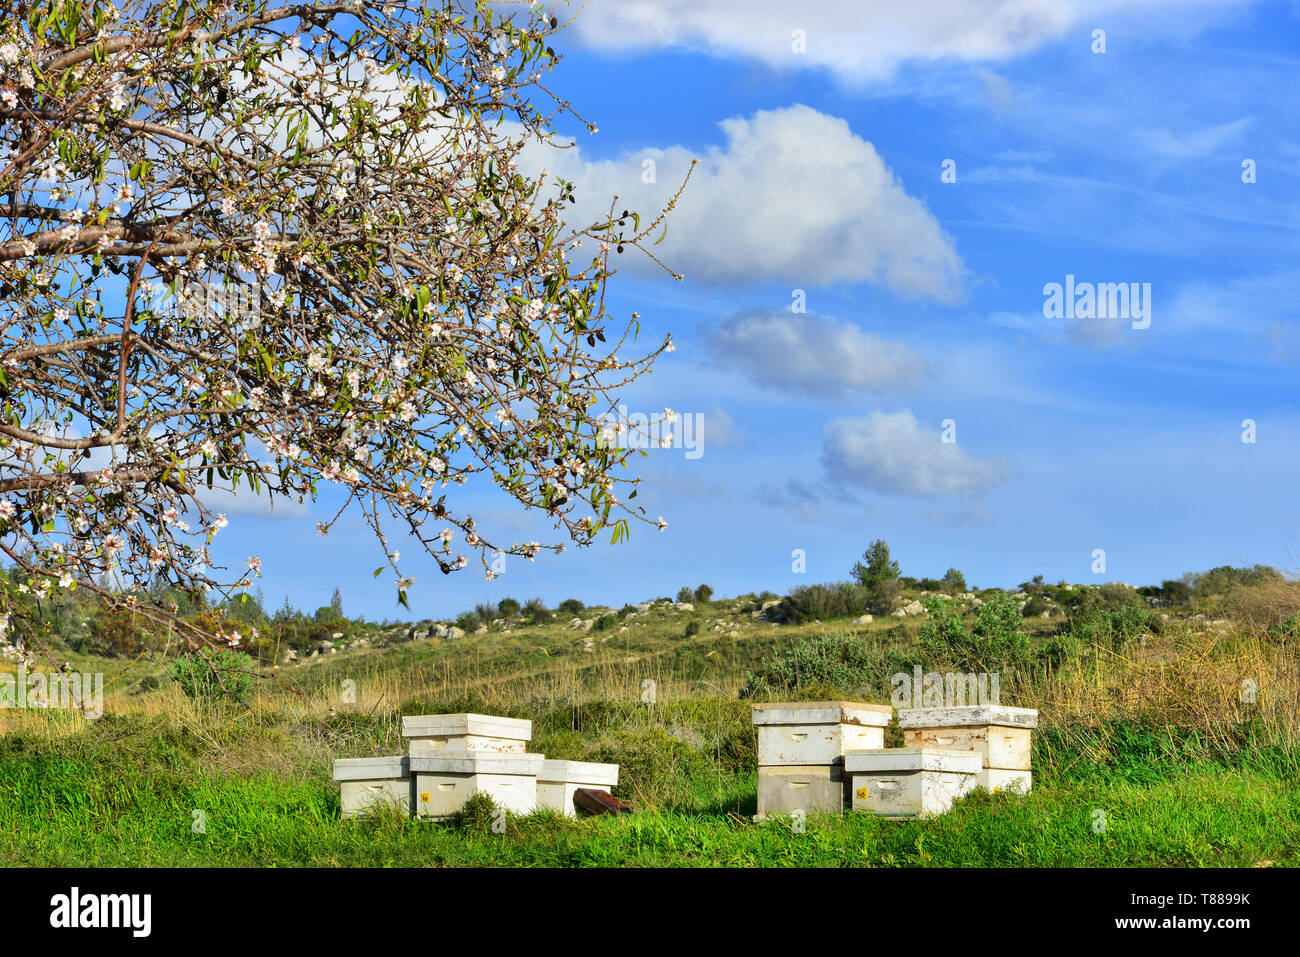 Blooming almonds, blue sky and beehives. Stock Photo